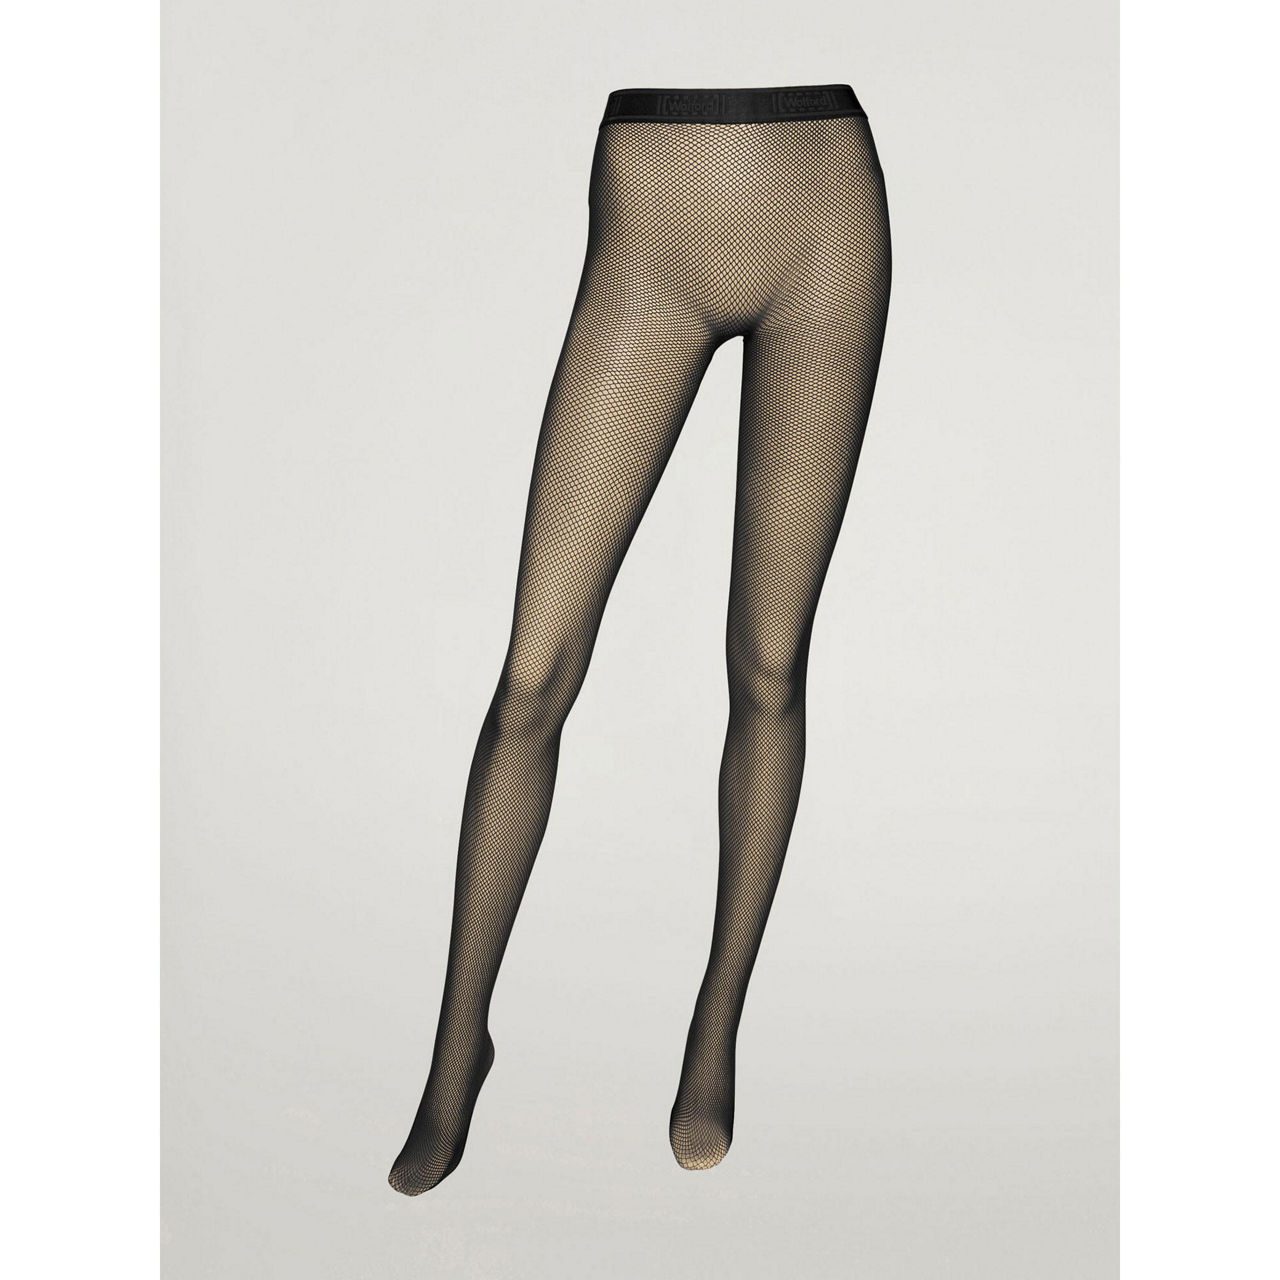 Wolford Velvet de Luxe 66 Tights 3 Pair Pack In Stock At UK Tights